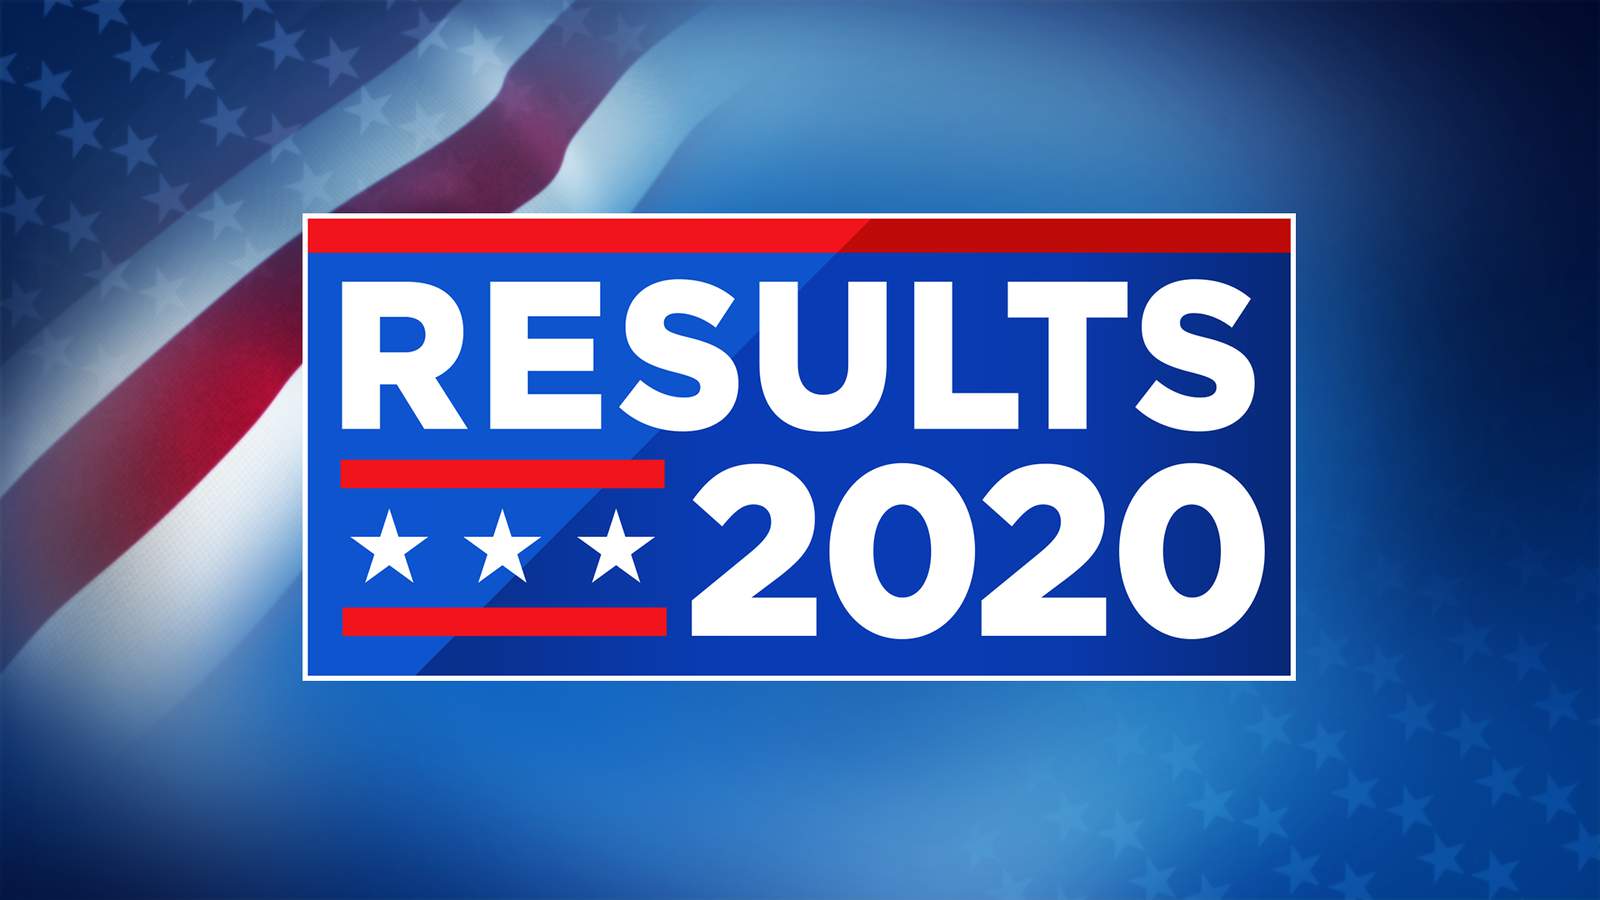 General Election Results for Central Florida Judicial Races on Nov. 3, 2020